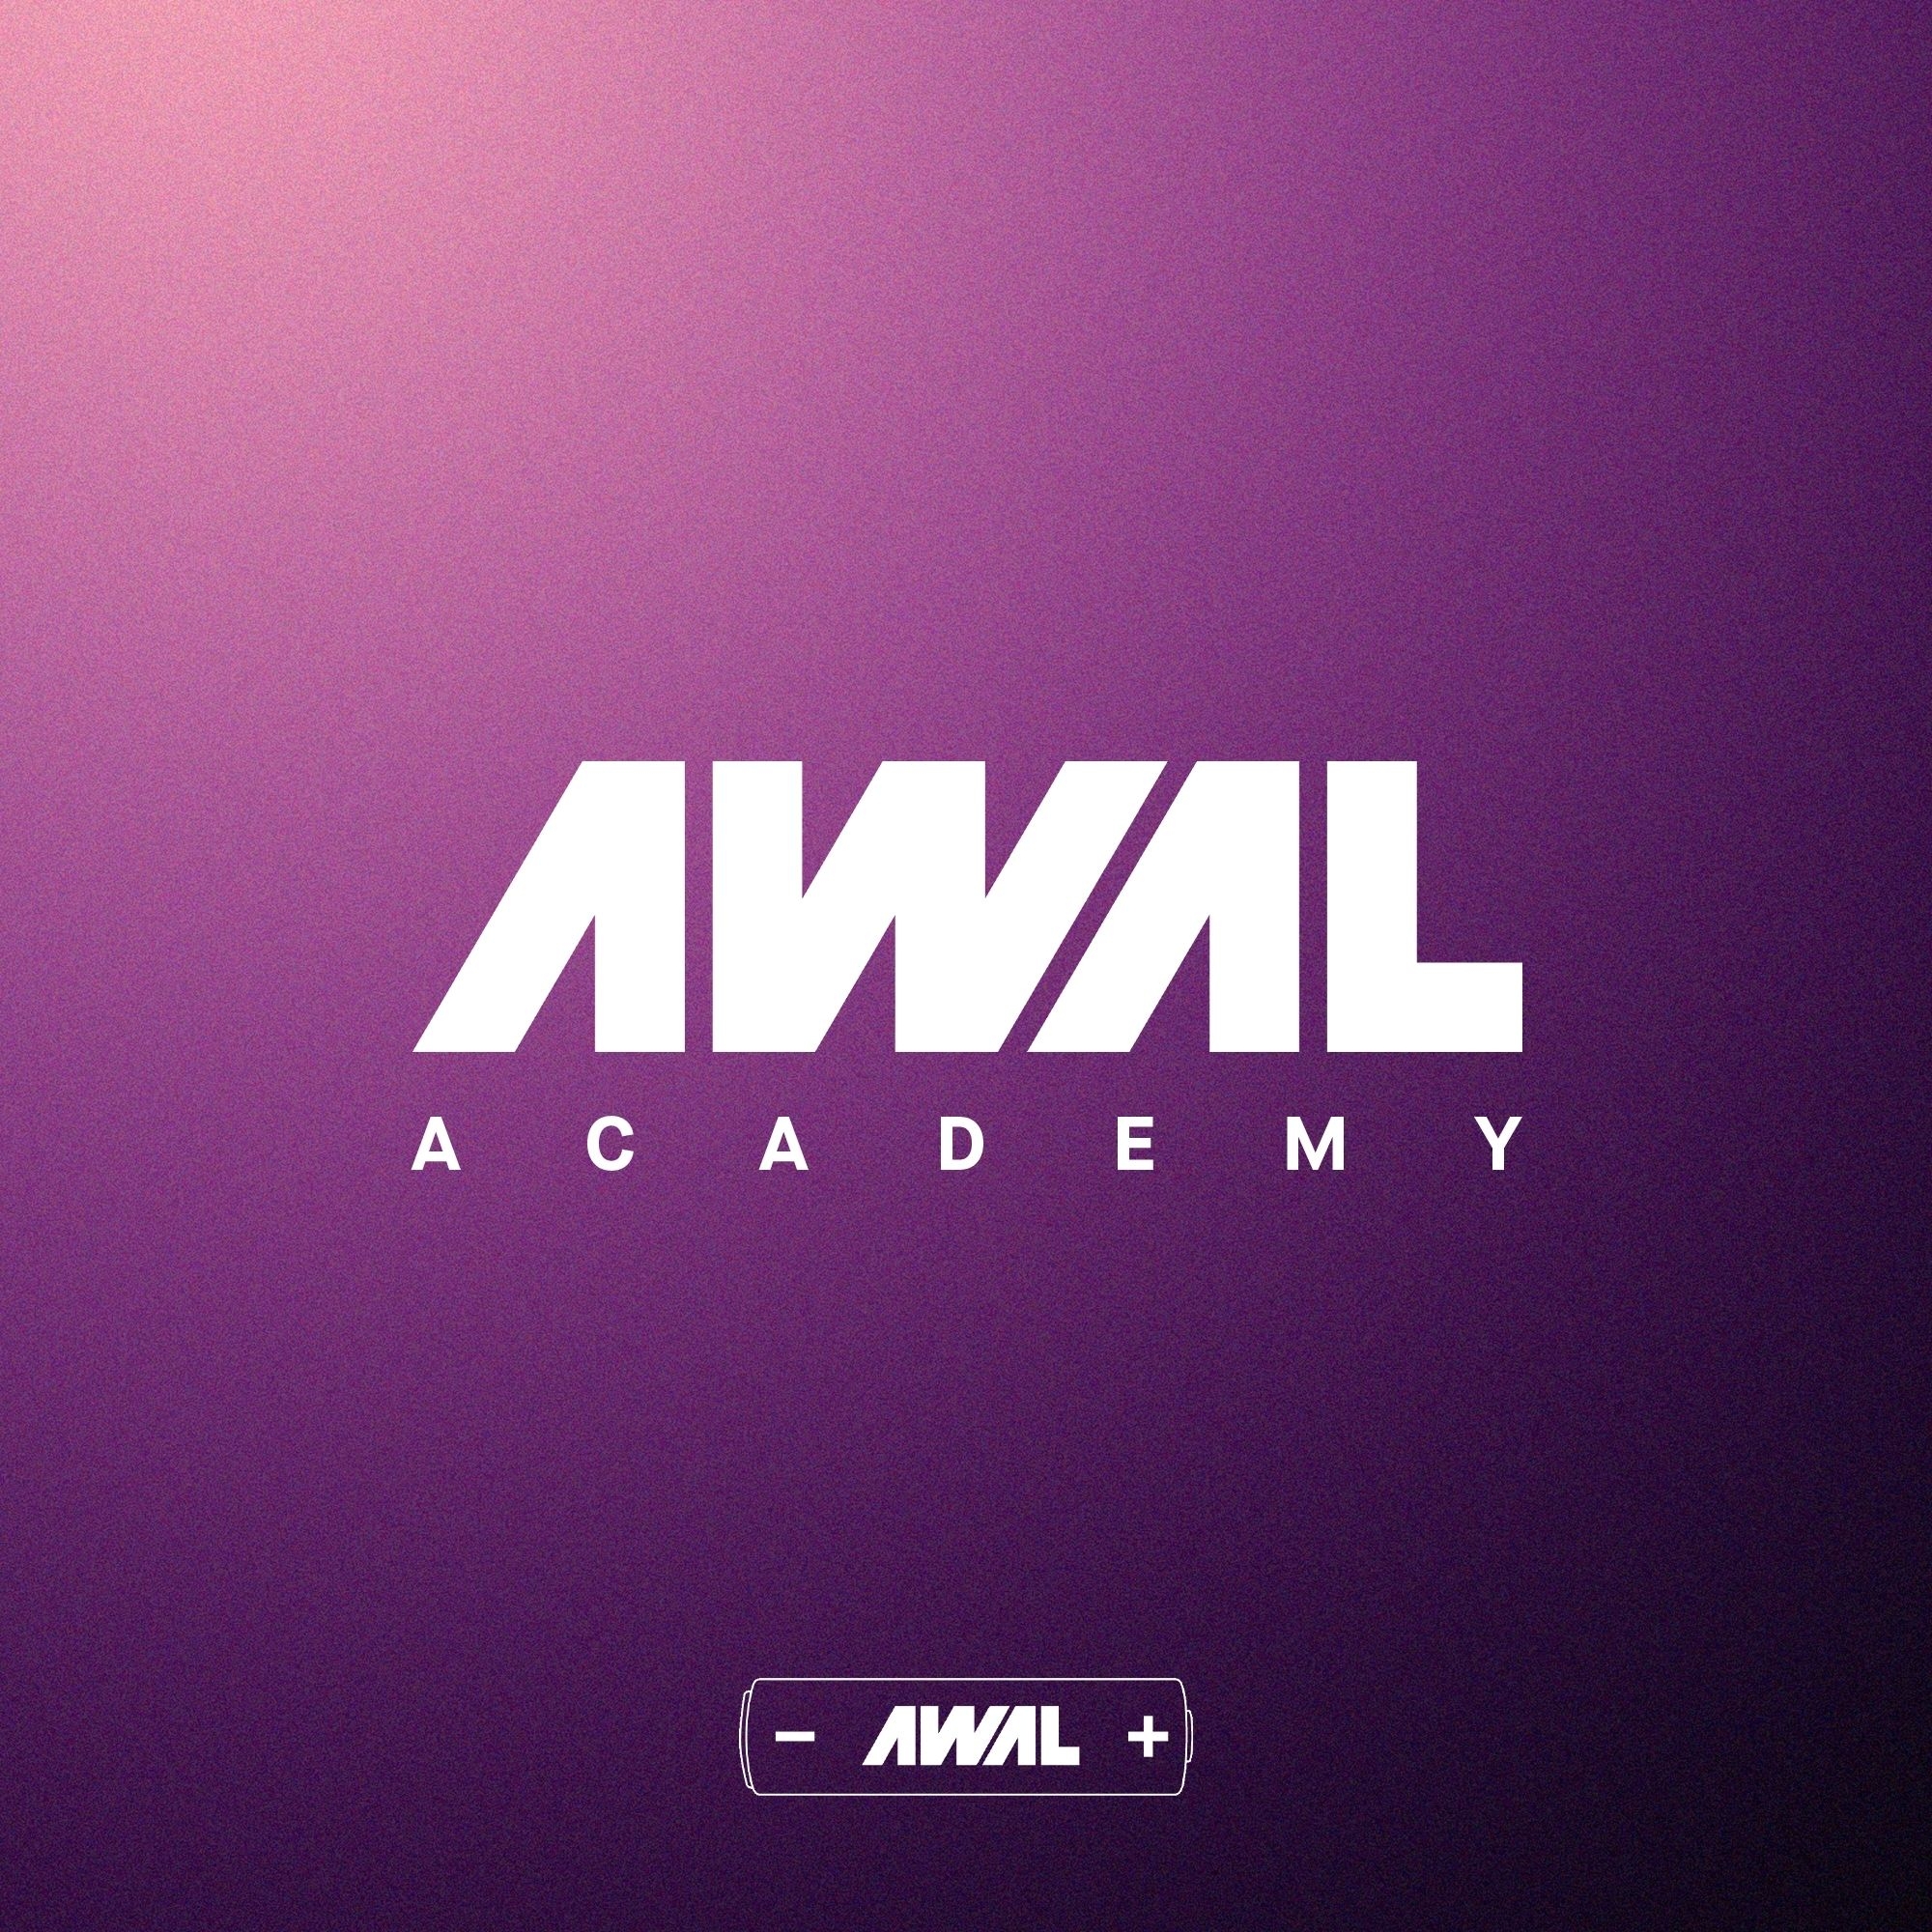 AWAL hosting expert sessions at Liverpool Sound City this year…